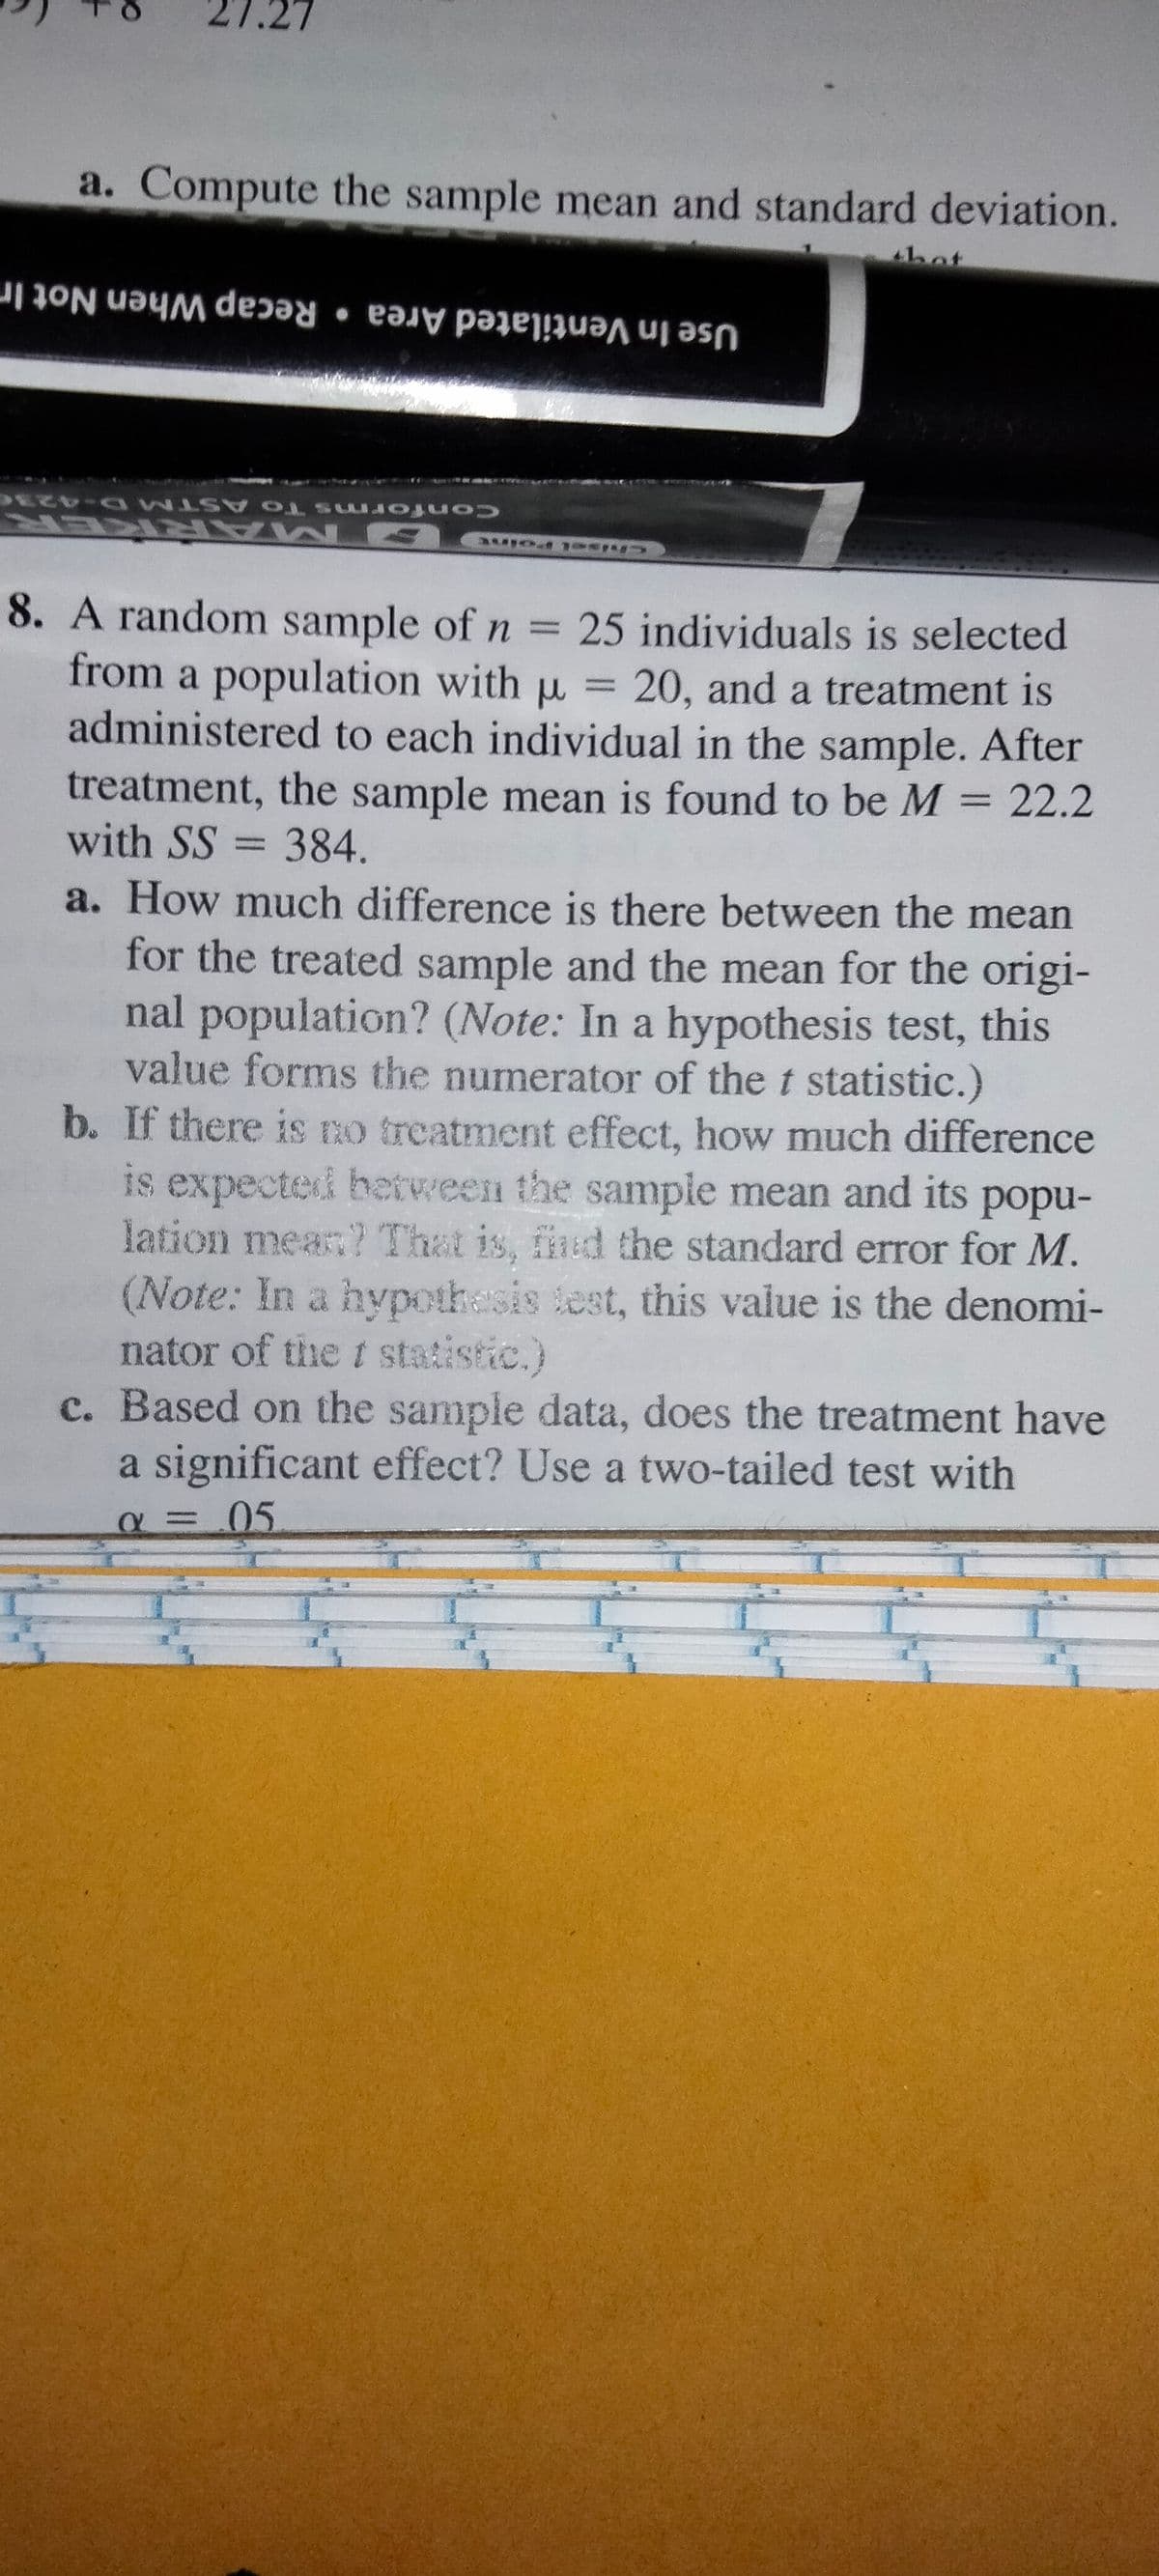 a. Compute the sample mean and standard deviation.
thot
Use In Ventilated Area • Recap When Not In
Confor ms To ASTM D-4236
BM ARK ER
8. A random sample of n = 25 individuals is selected
from a population with u = 20, and a treatment is
administered to each individual in the sample. After
treatment, the sample mean is found to be M = 22.2
with SS = 384.
a. How much difference is there between the mean
for the treated sample and the mean for the origi-
nal population? (Note: In a hypothesis test, this
value forms the numerator of the t statistic.)
b. If there is no treatment effect, how much difference
is expected between the sample mean and its popu-
lation mean? That is, find the standard error for M.
(Note: In a hypothasis lest, this value is the denomi-
nator of the t statistic.)
c. Based on the sample data, does the treatment have
a significant effect? Use a two-tailed test with
